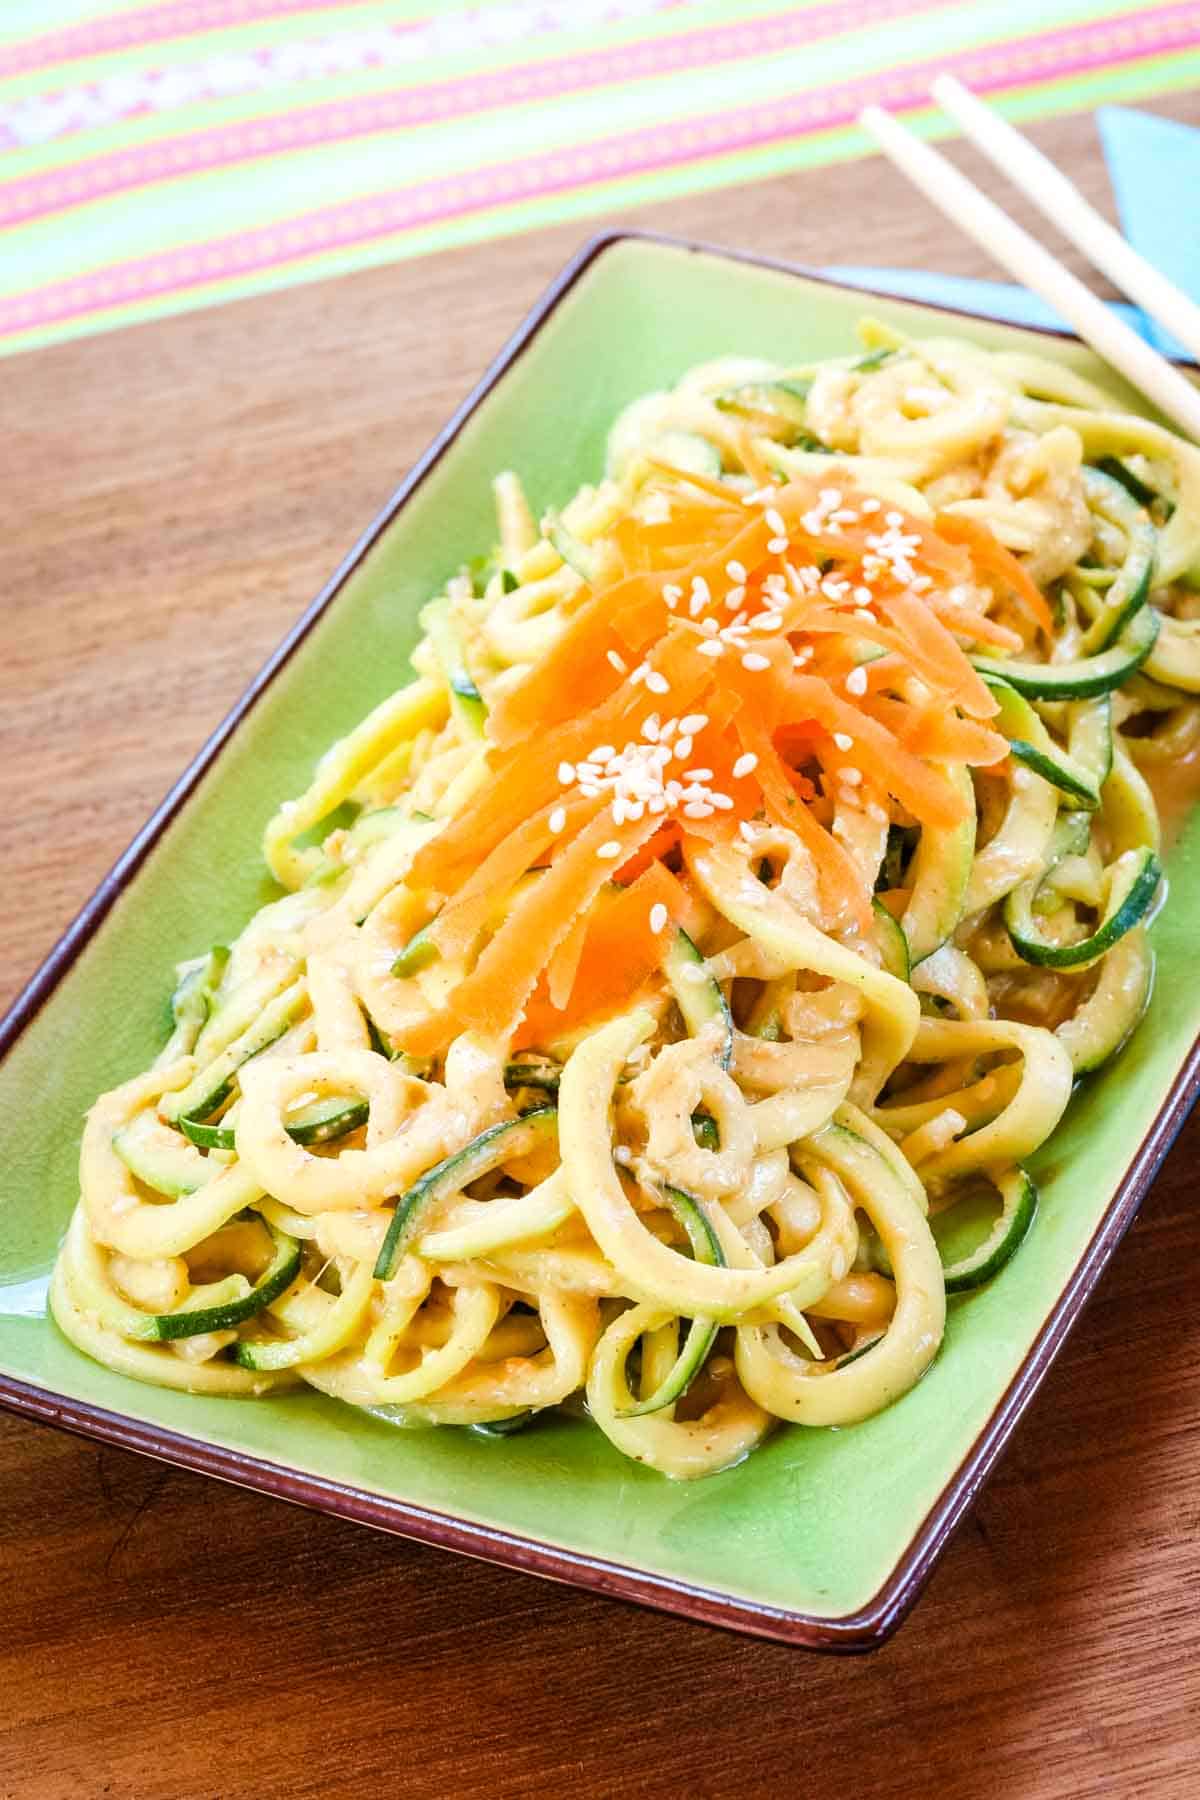 Cold Sesame Zucchini Noodles Salad Recipe image with title text